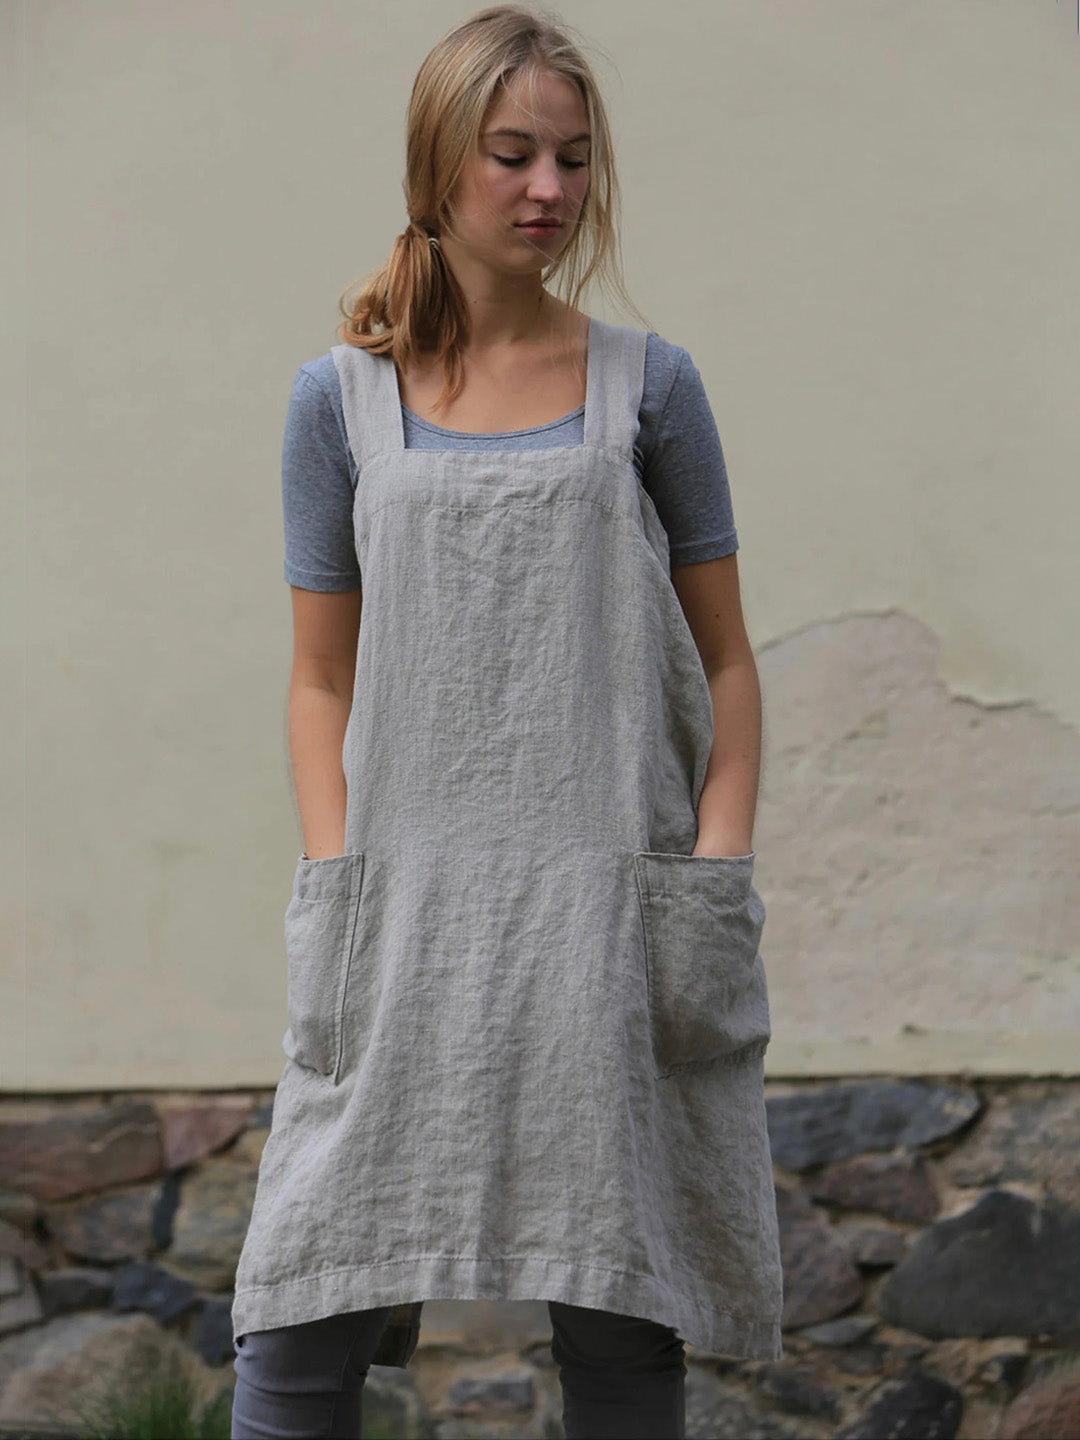 Square Cross Cotton and Linen Pinafore Apron with Deep Pockets